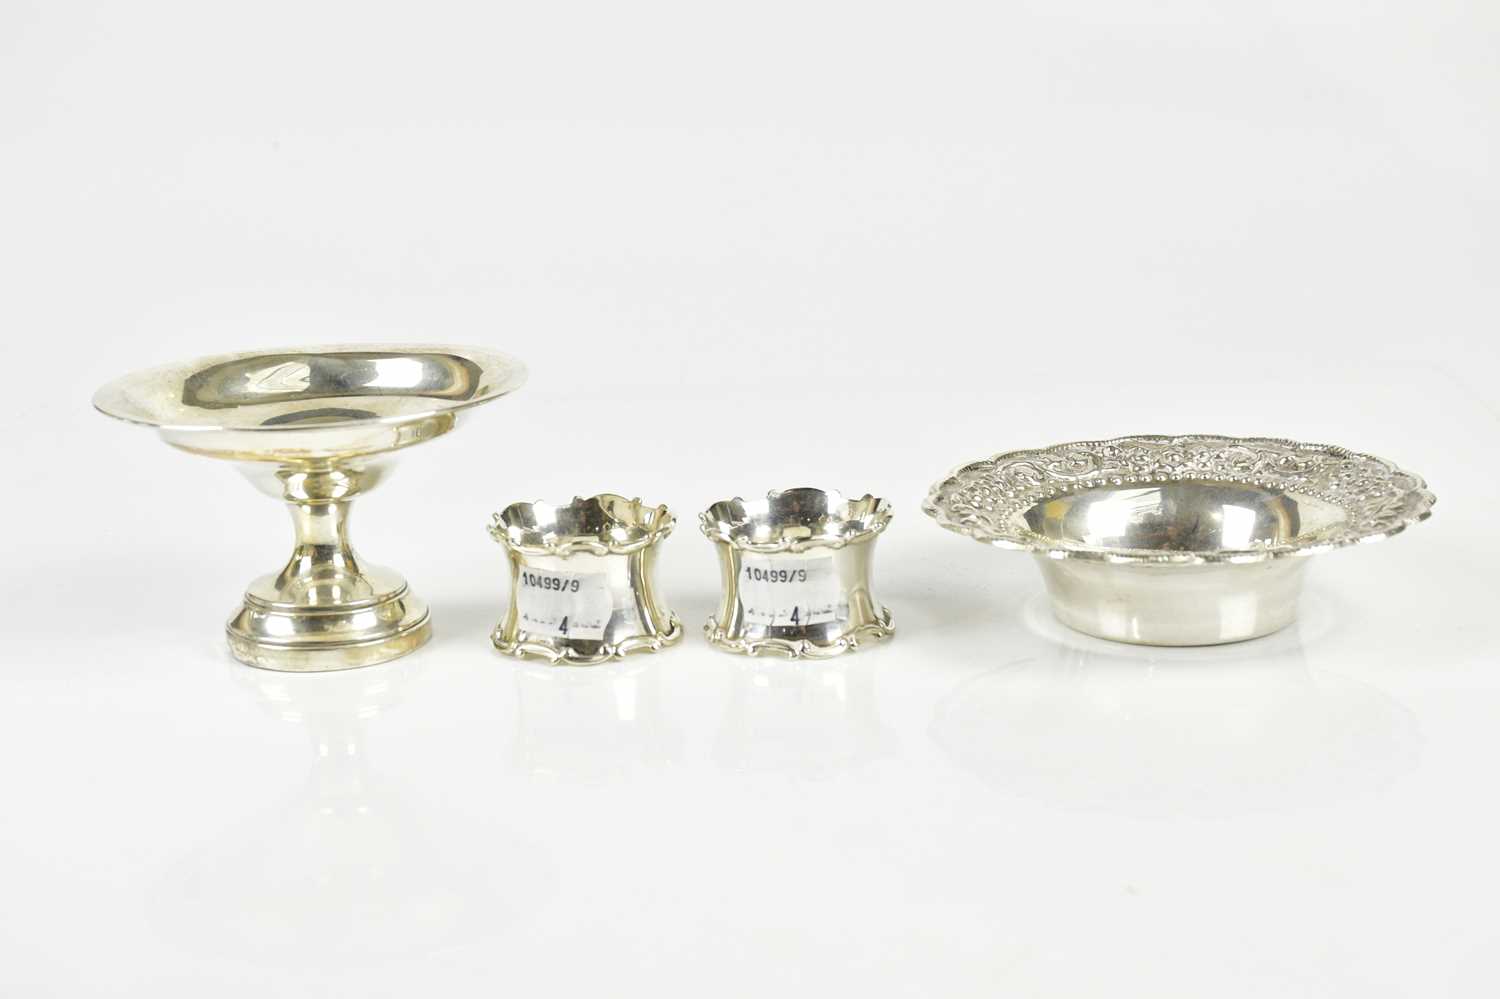 HORACE WOODWARD & CO; a pair of George V hallmarked silver napkin rings, Birmingham 1922, together